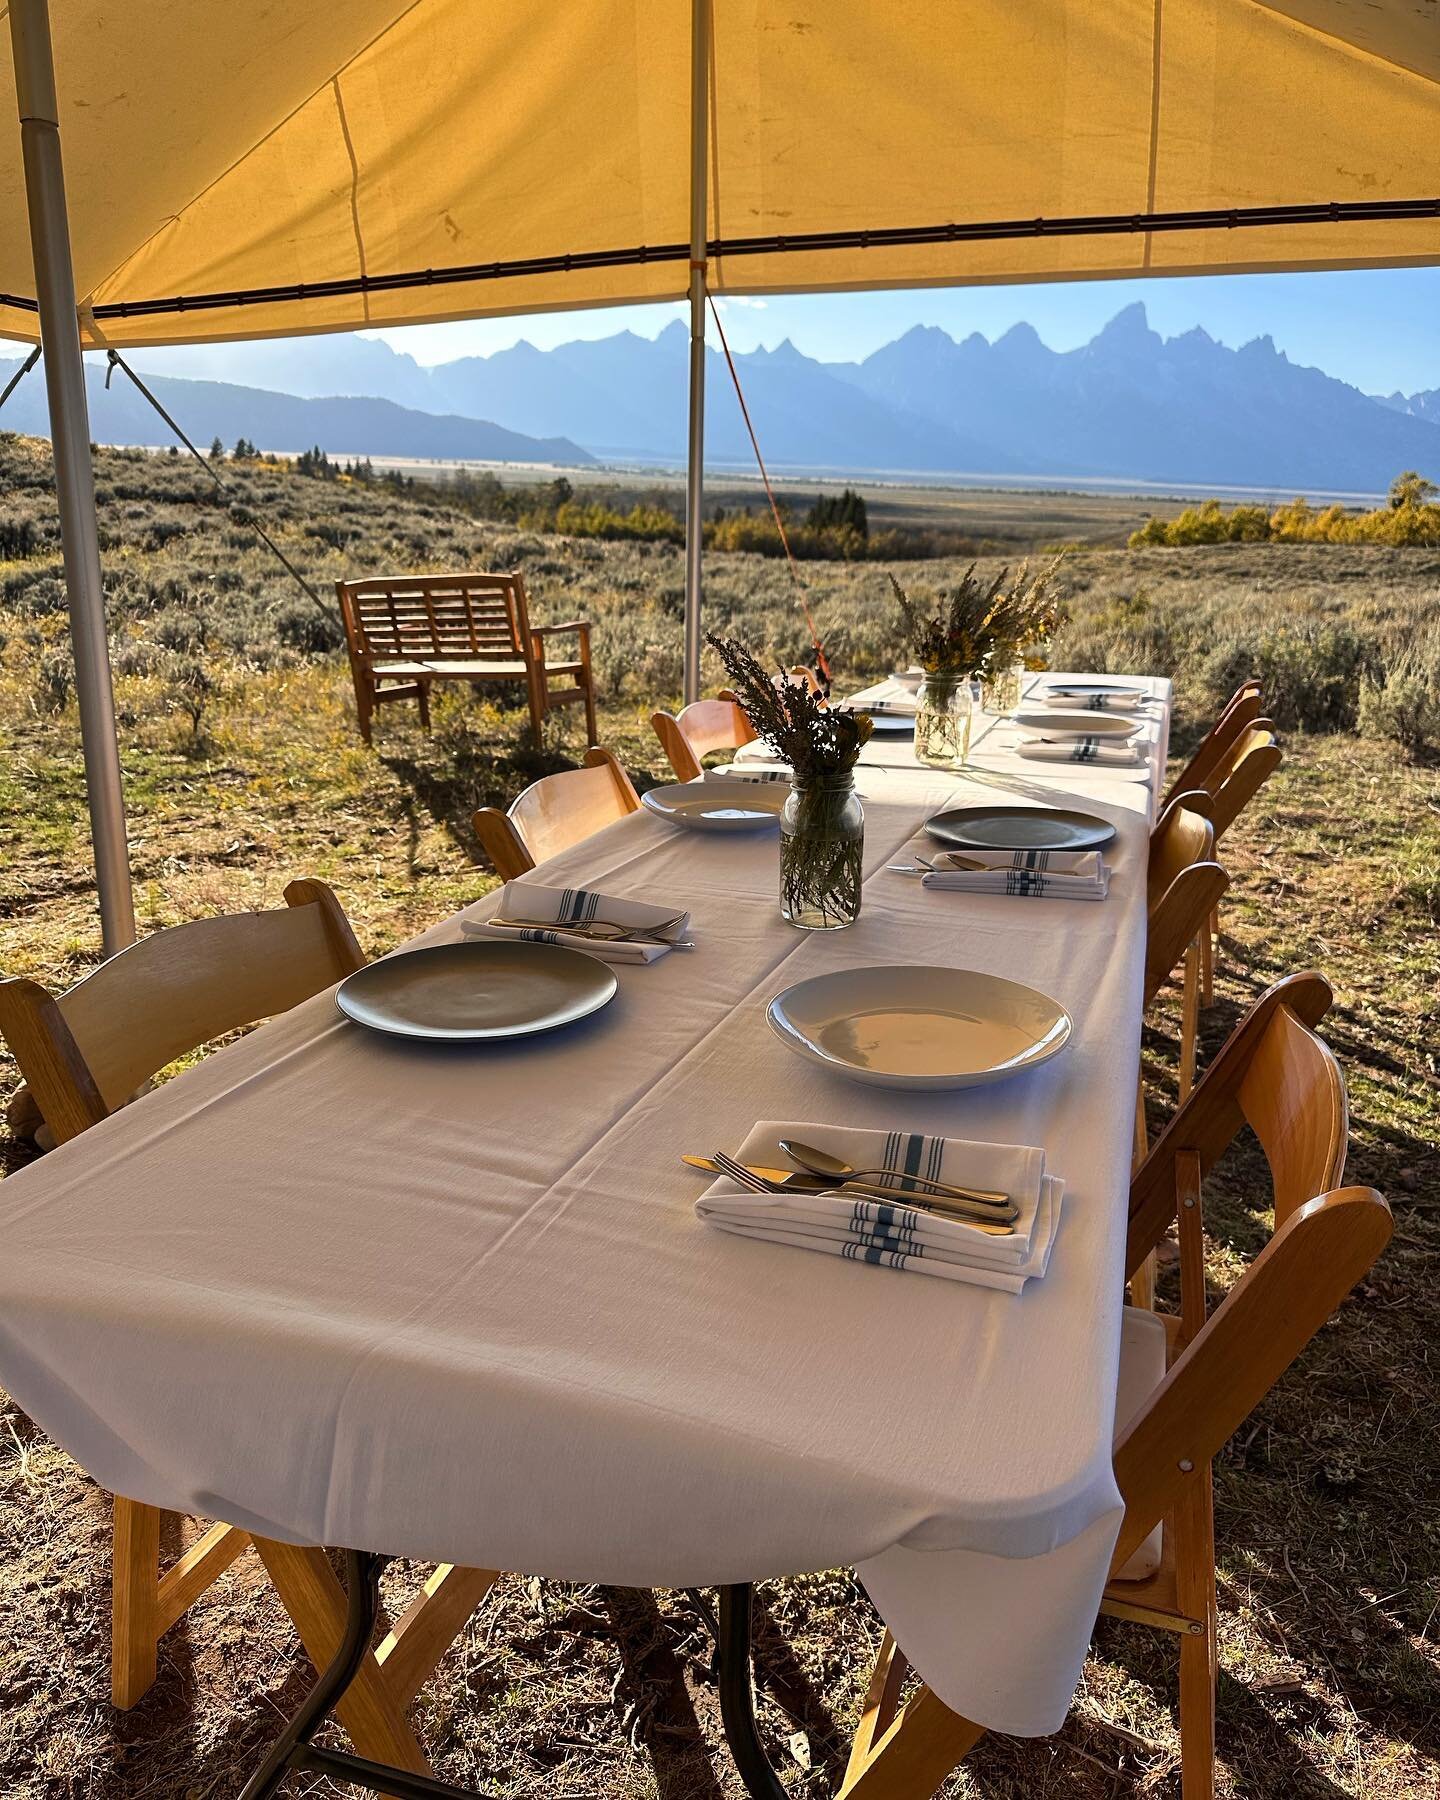 Your table awaits, views are complimentary. Taste the best of what the Tetons have to offer. Teton Tapas rides depart Friday, Saturday and Sunday. Custom tailored trail rides are available any day of the week! Book your seat in a saddle with JH Outfi